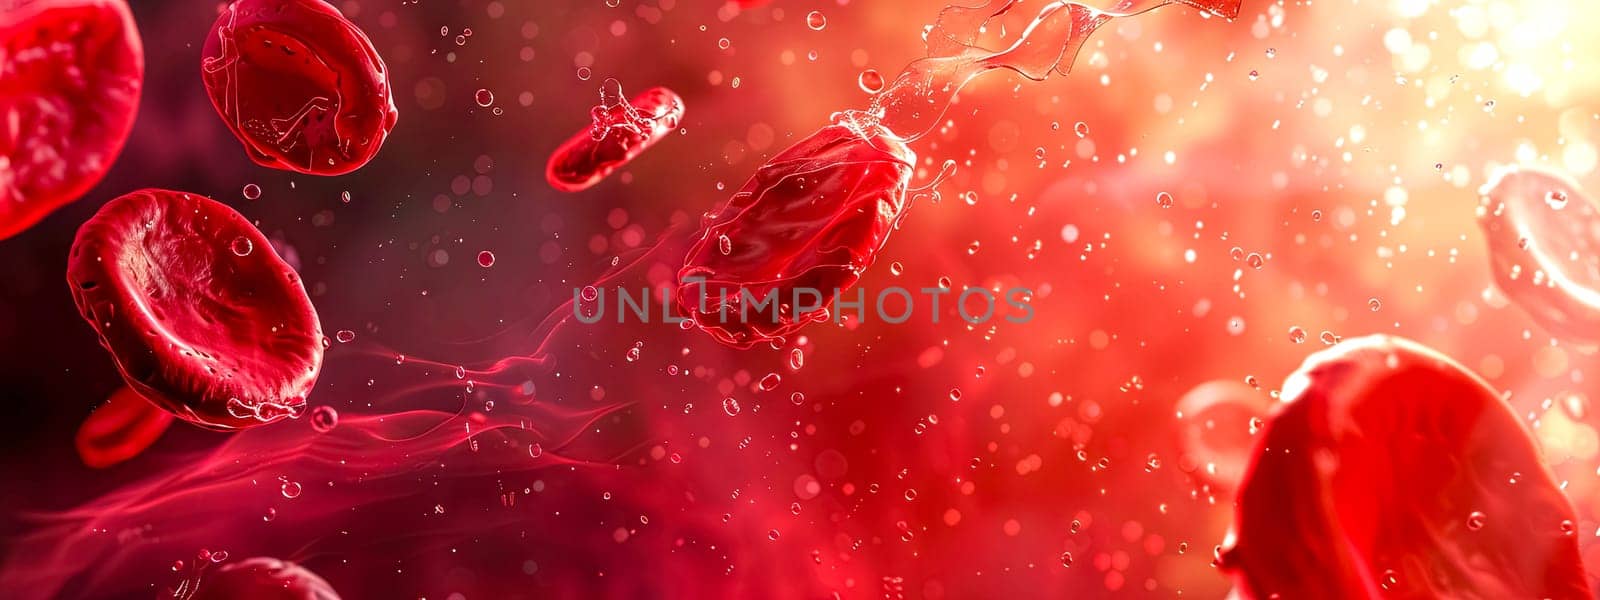 Abstract red blood cells flowing in plasma by Edophoto